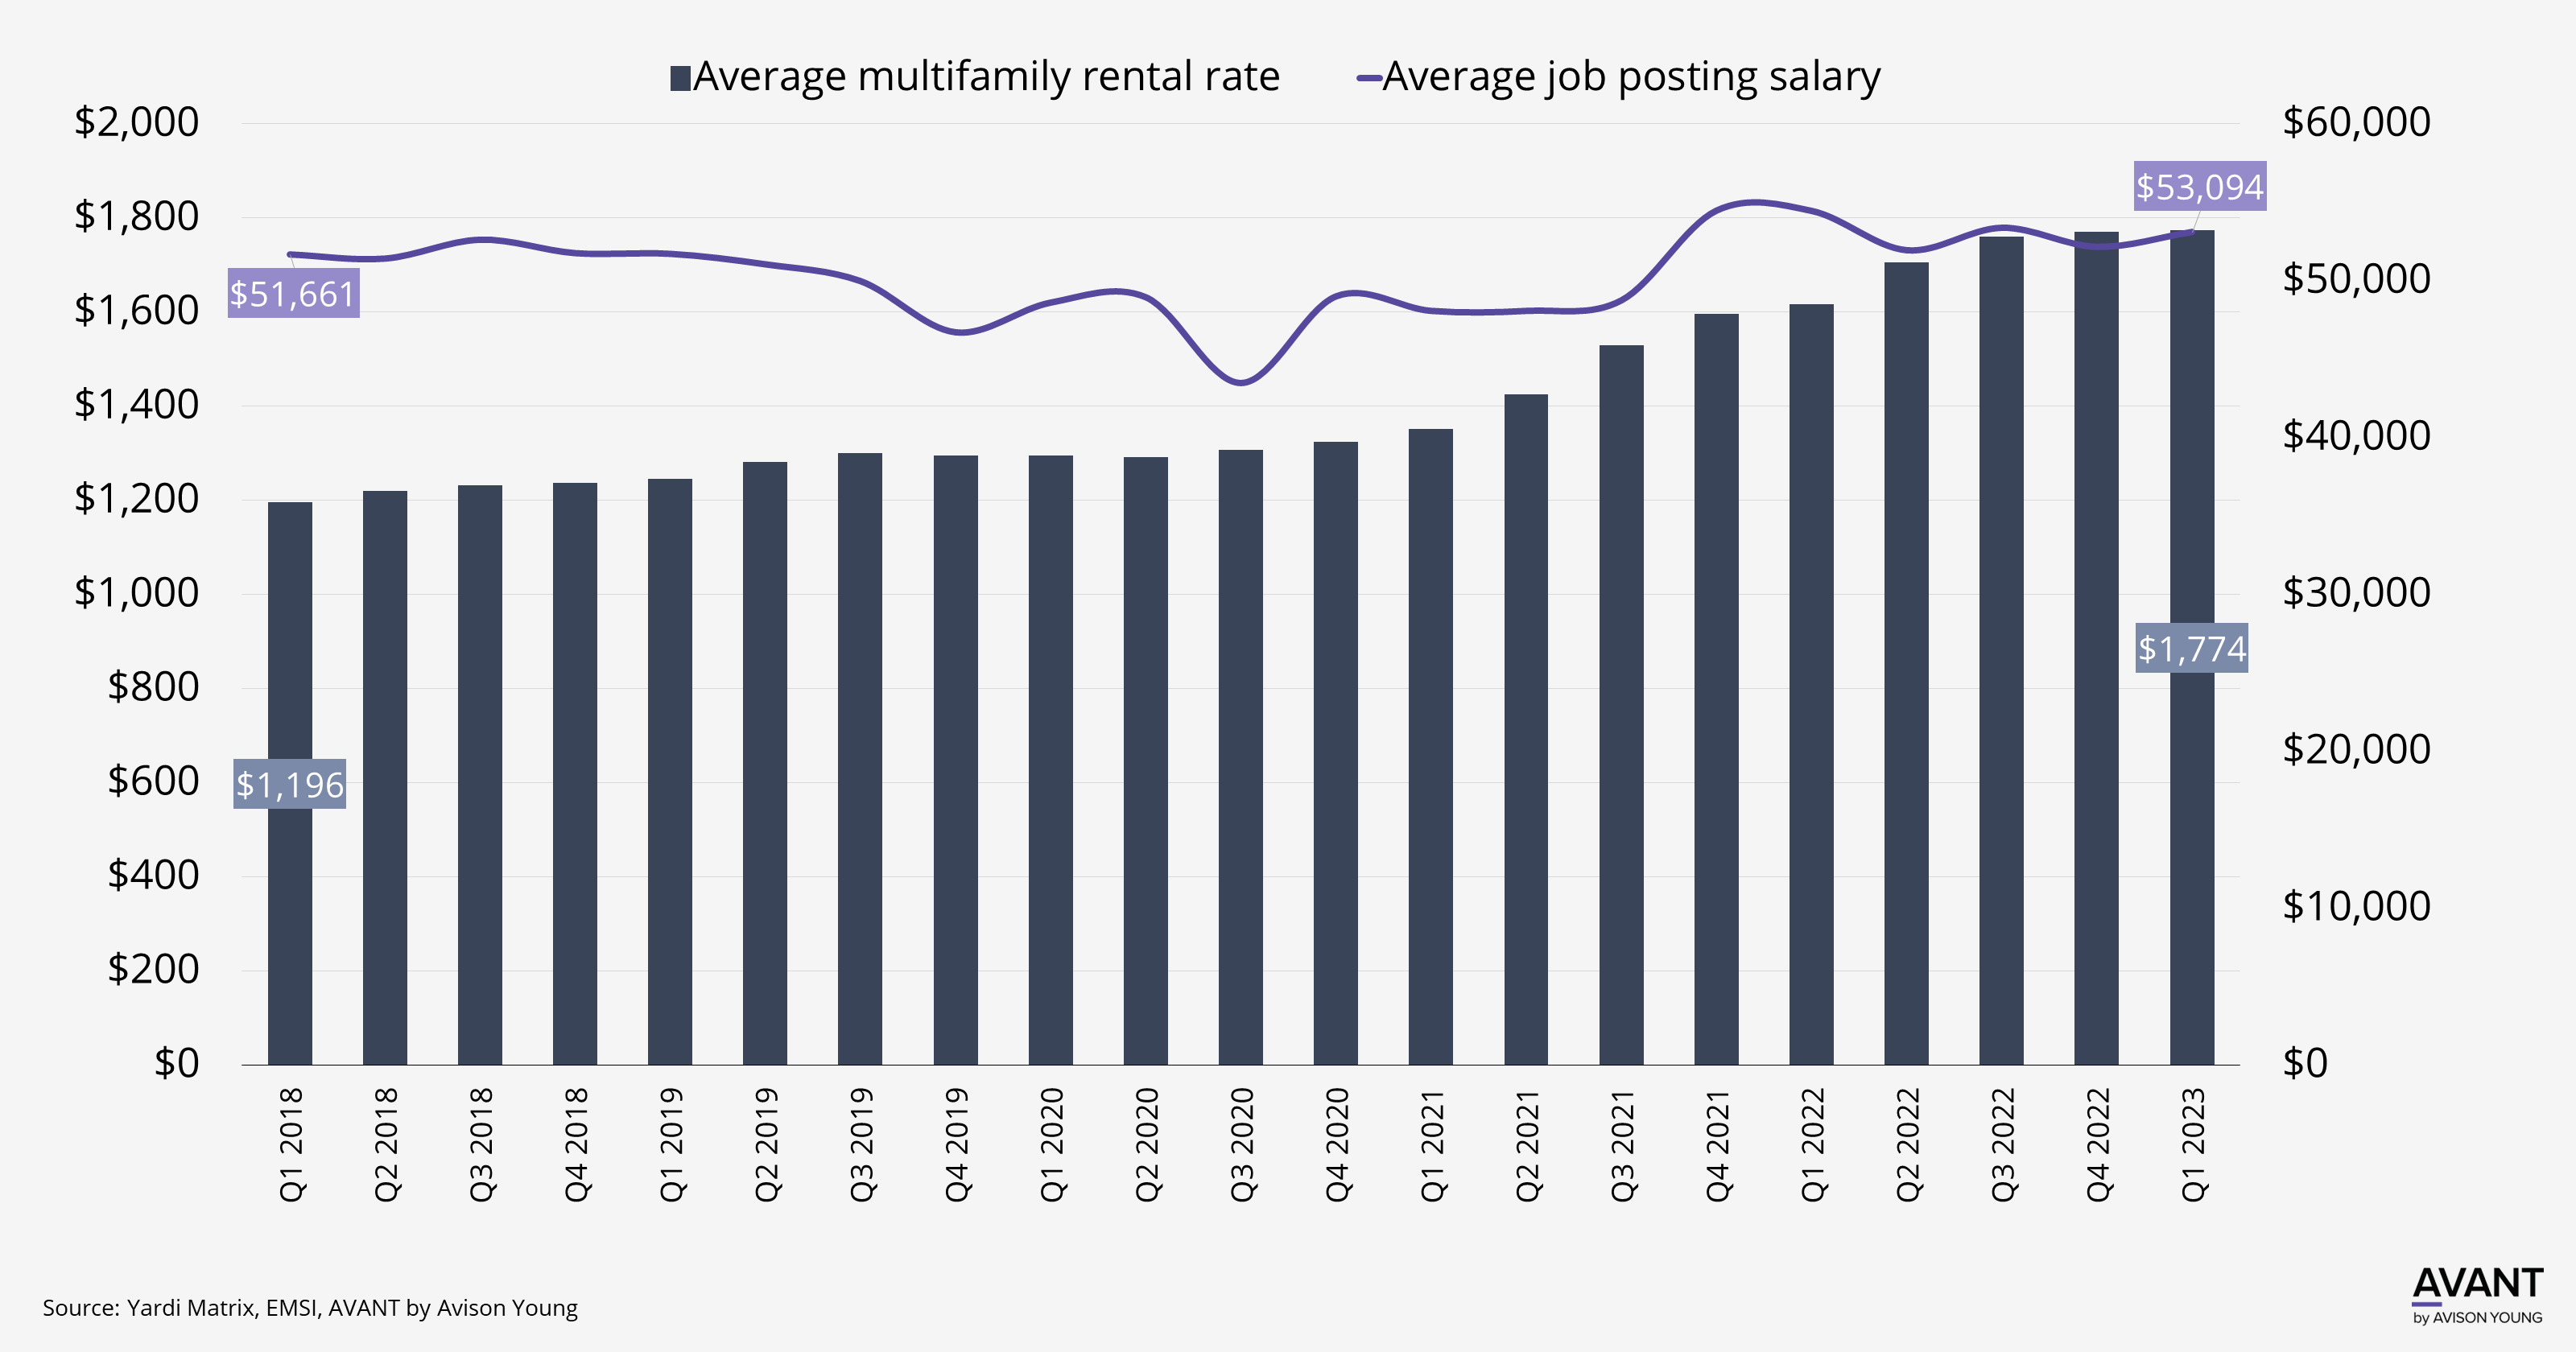 graph of average multifamily rental rate compared to average job posting salary in Charleston, South Carolina from 2018 to 2023